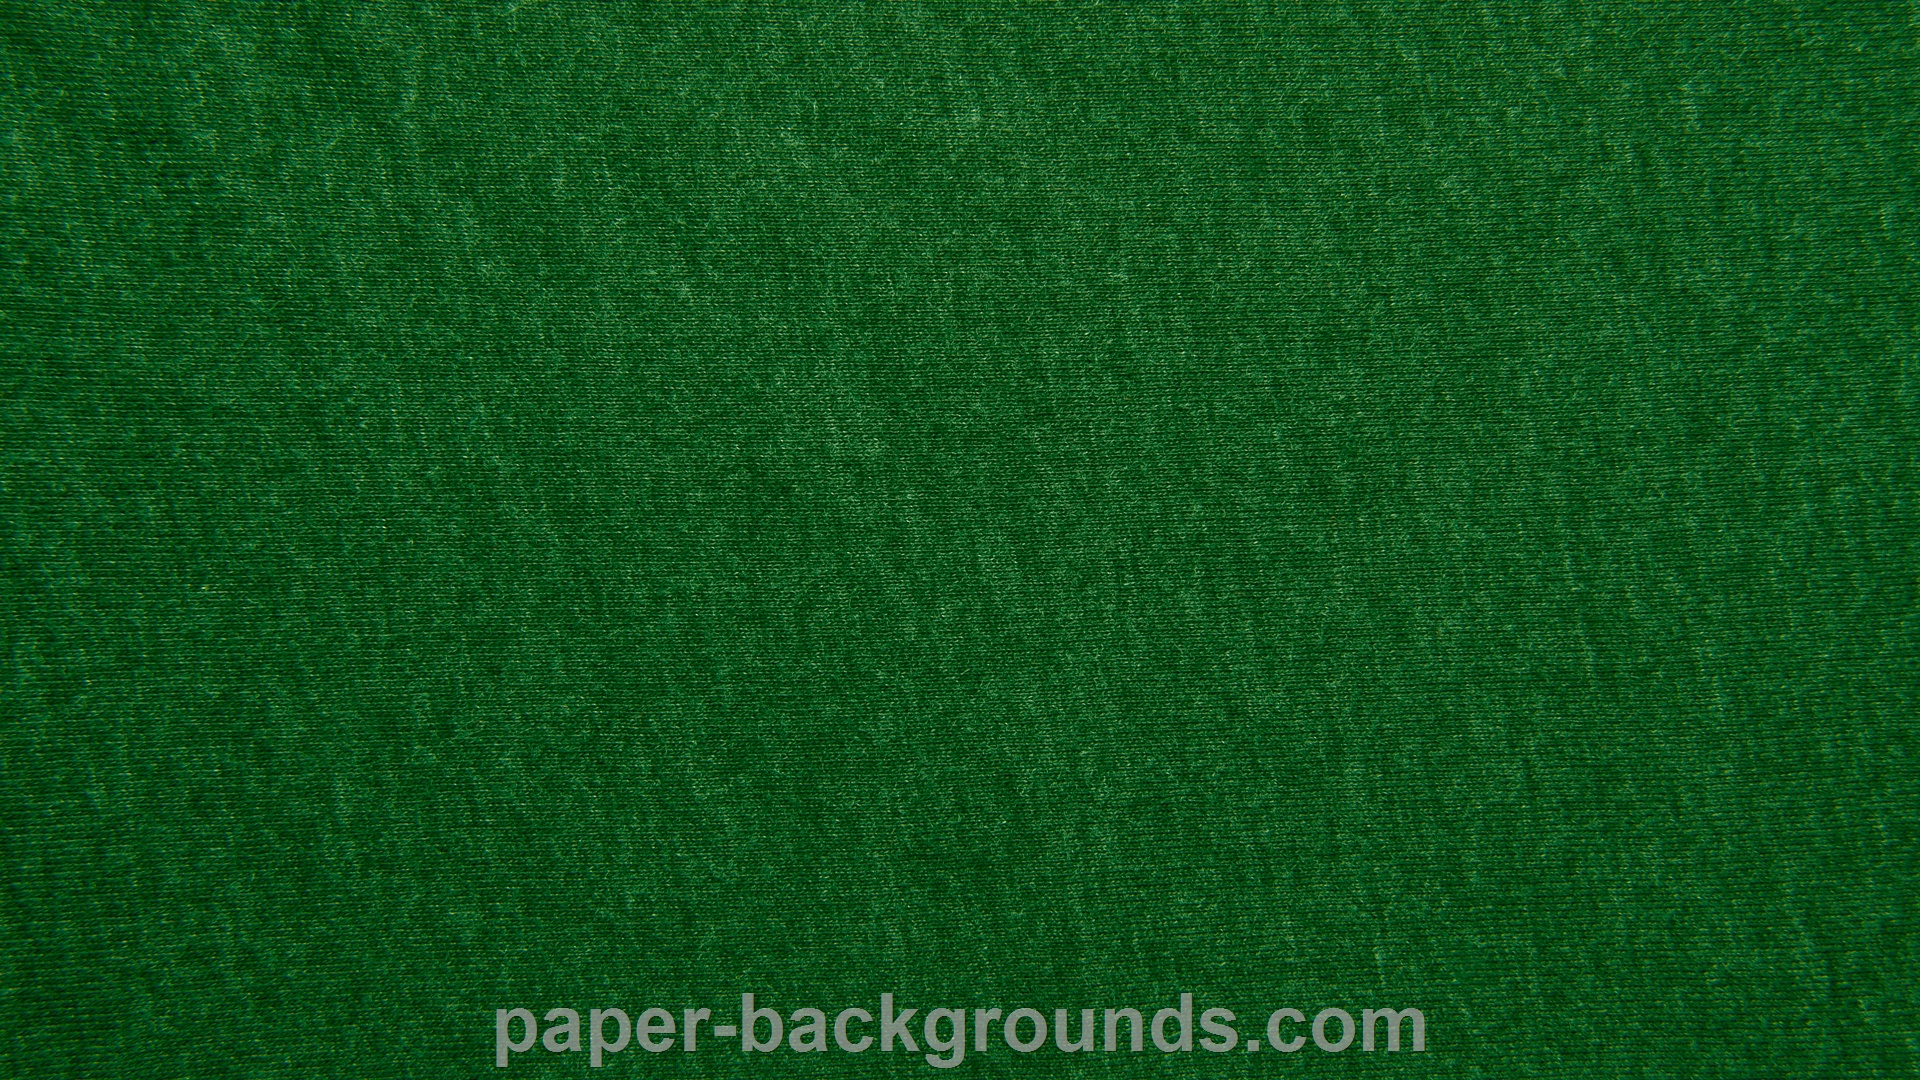 Paper Backgrounds green fabric texture background hd